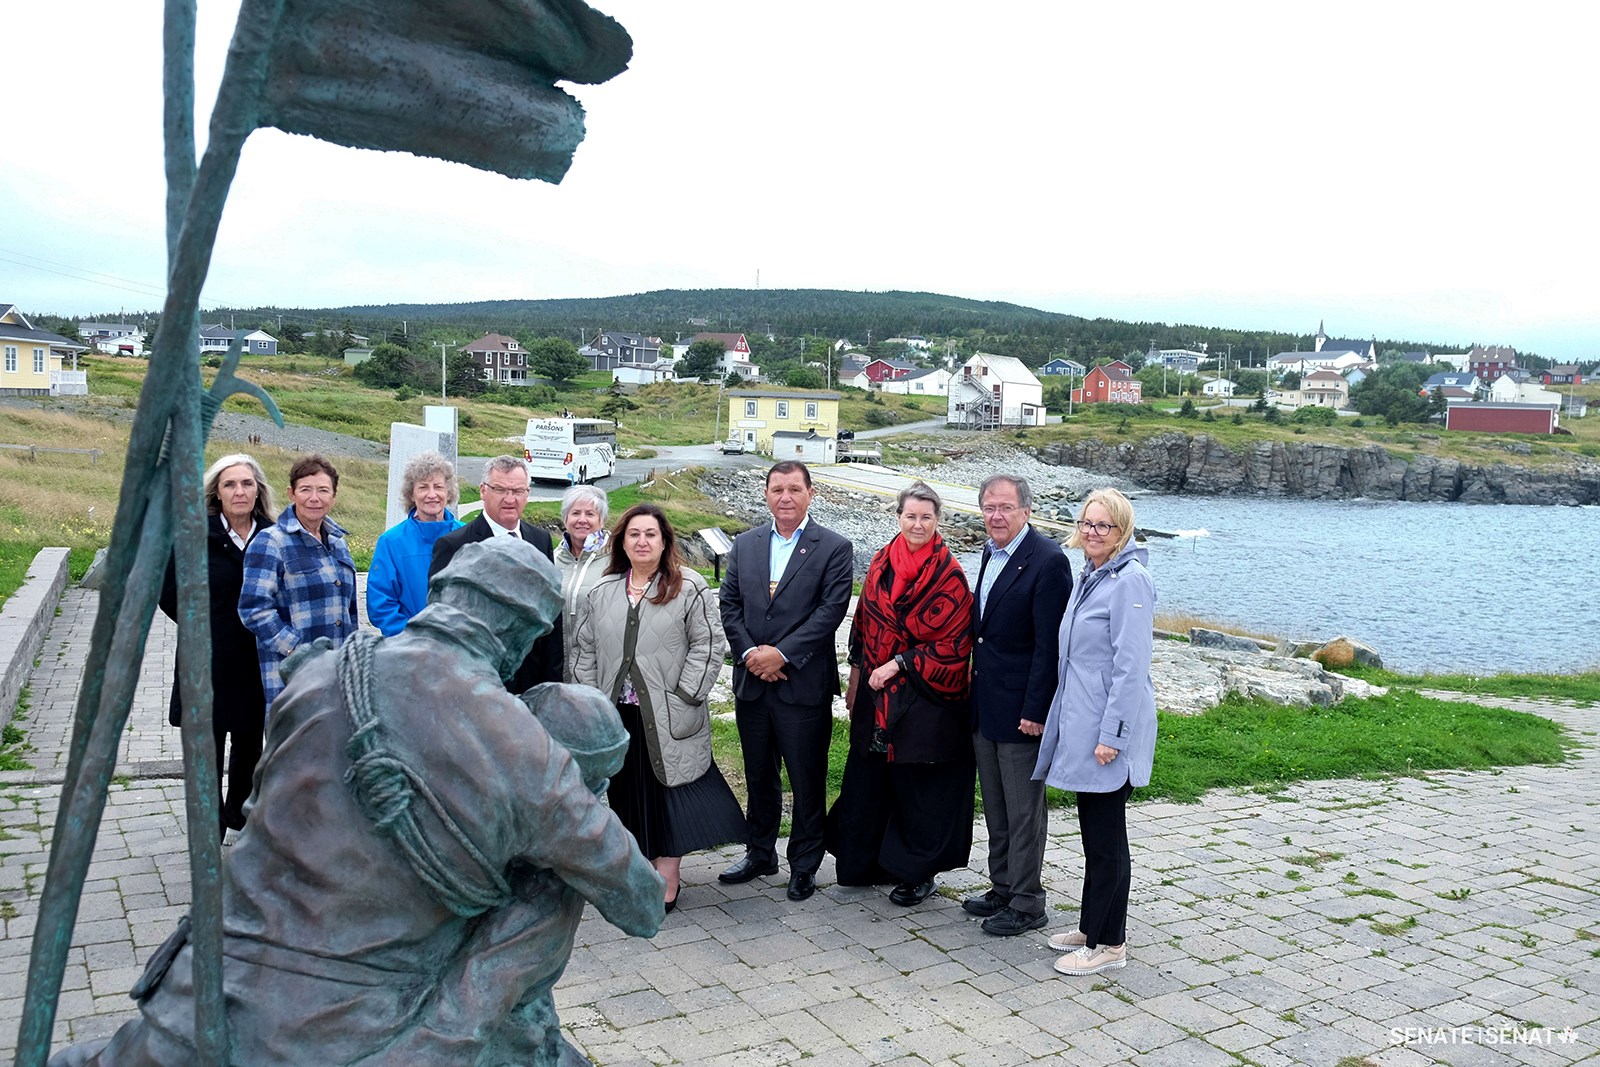 During a visit to the Sealers Memorial Statue and Monument in Elliston, senators learned about the disaster of 1914 that claimed the lives of 251 sealers.